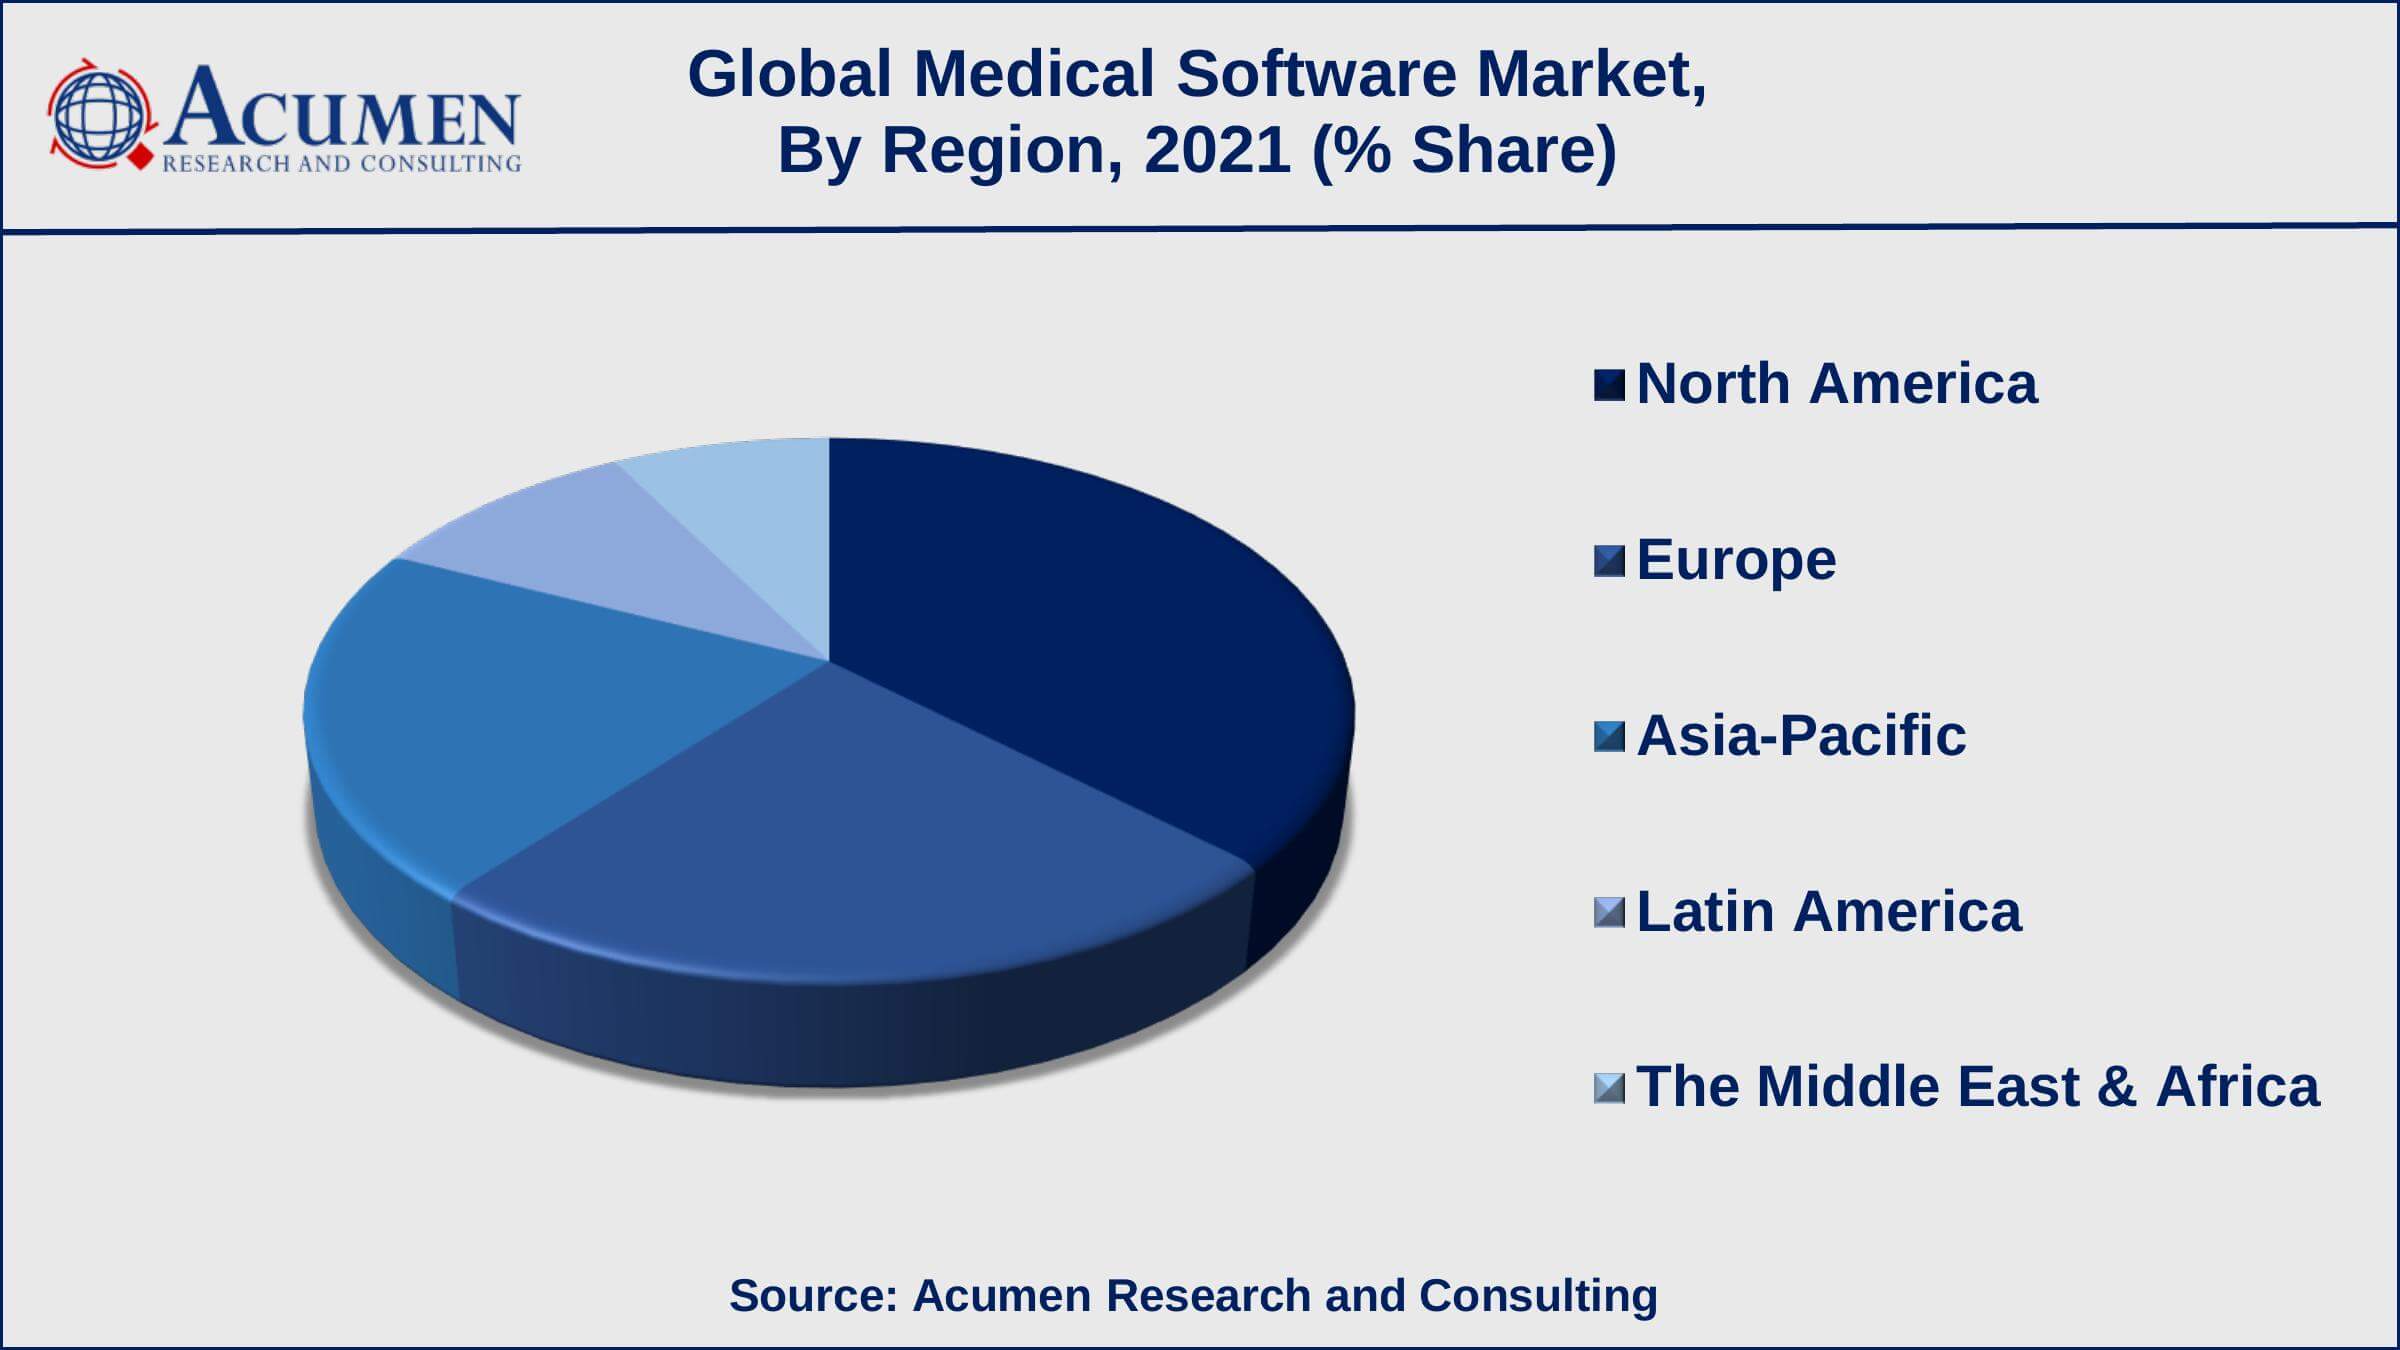 The increased focus on data analytics is a popular medical software market trend that drives the industry demand